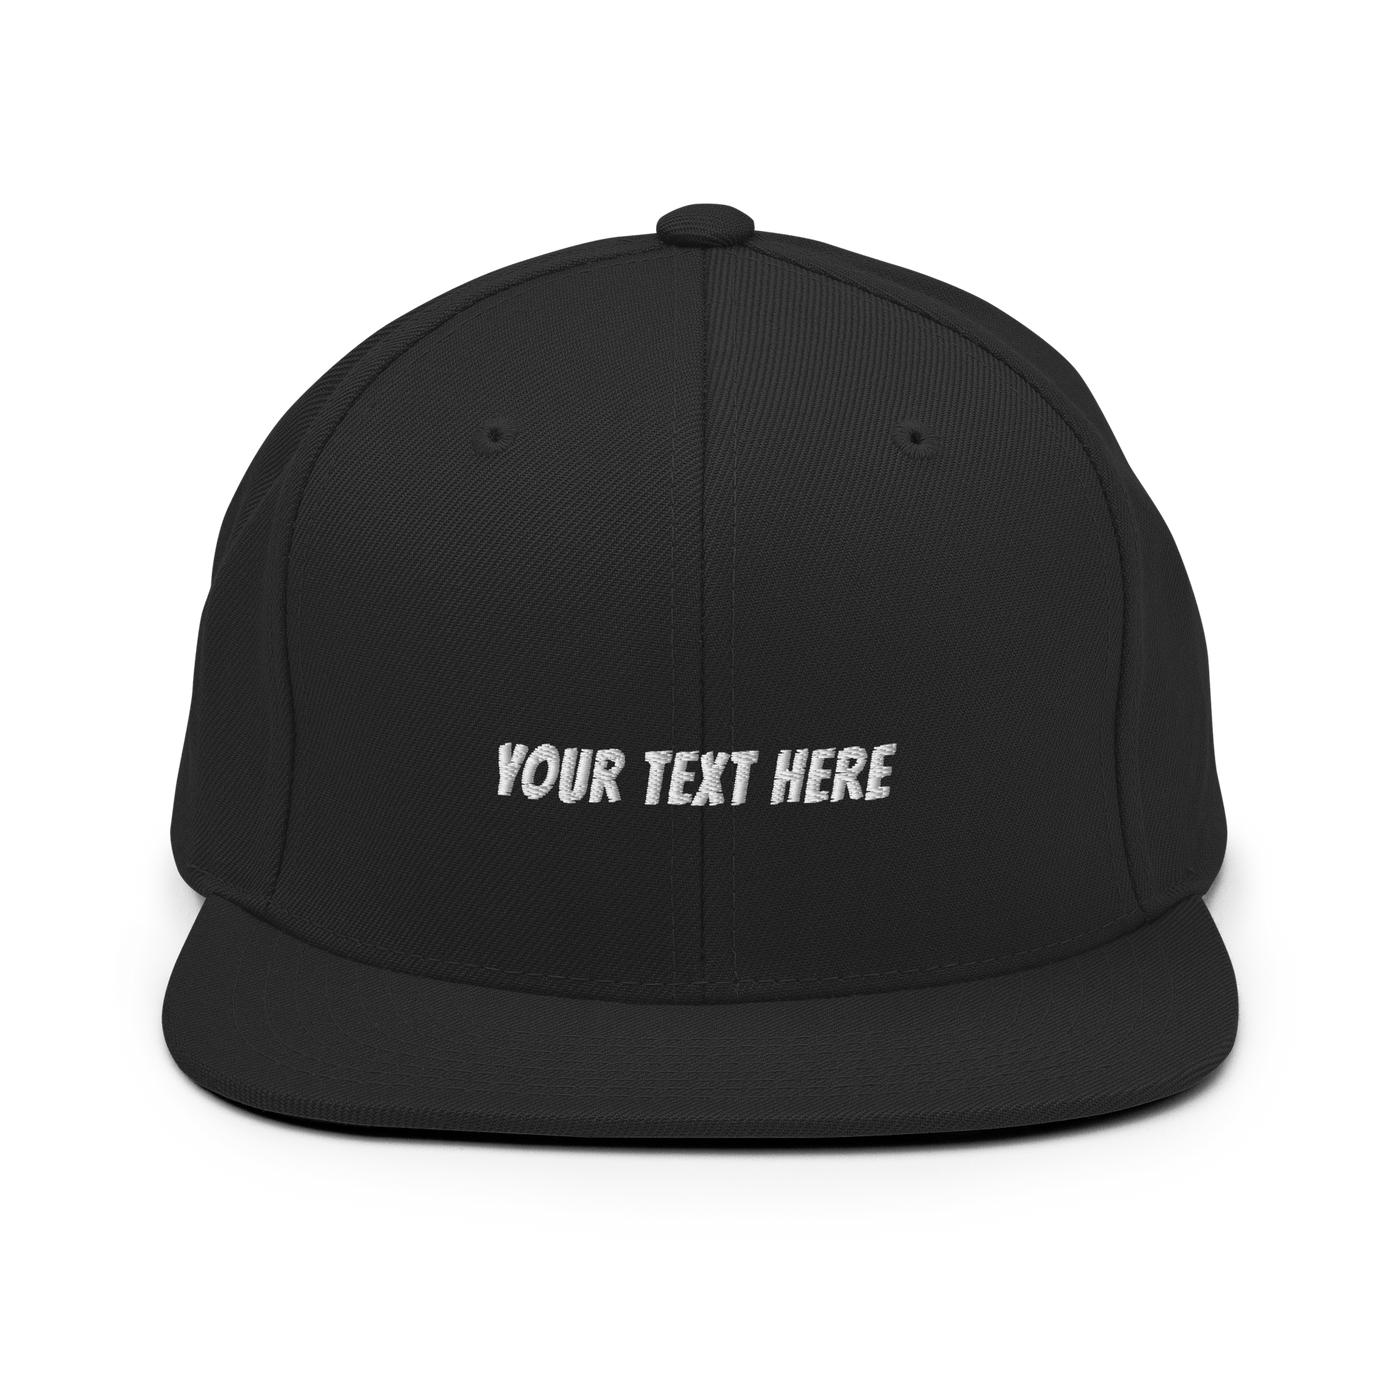 Customize Your Own Snapback Hat - Banger Font - Black - - Just Another Cap Store